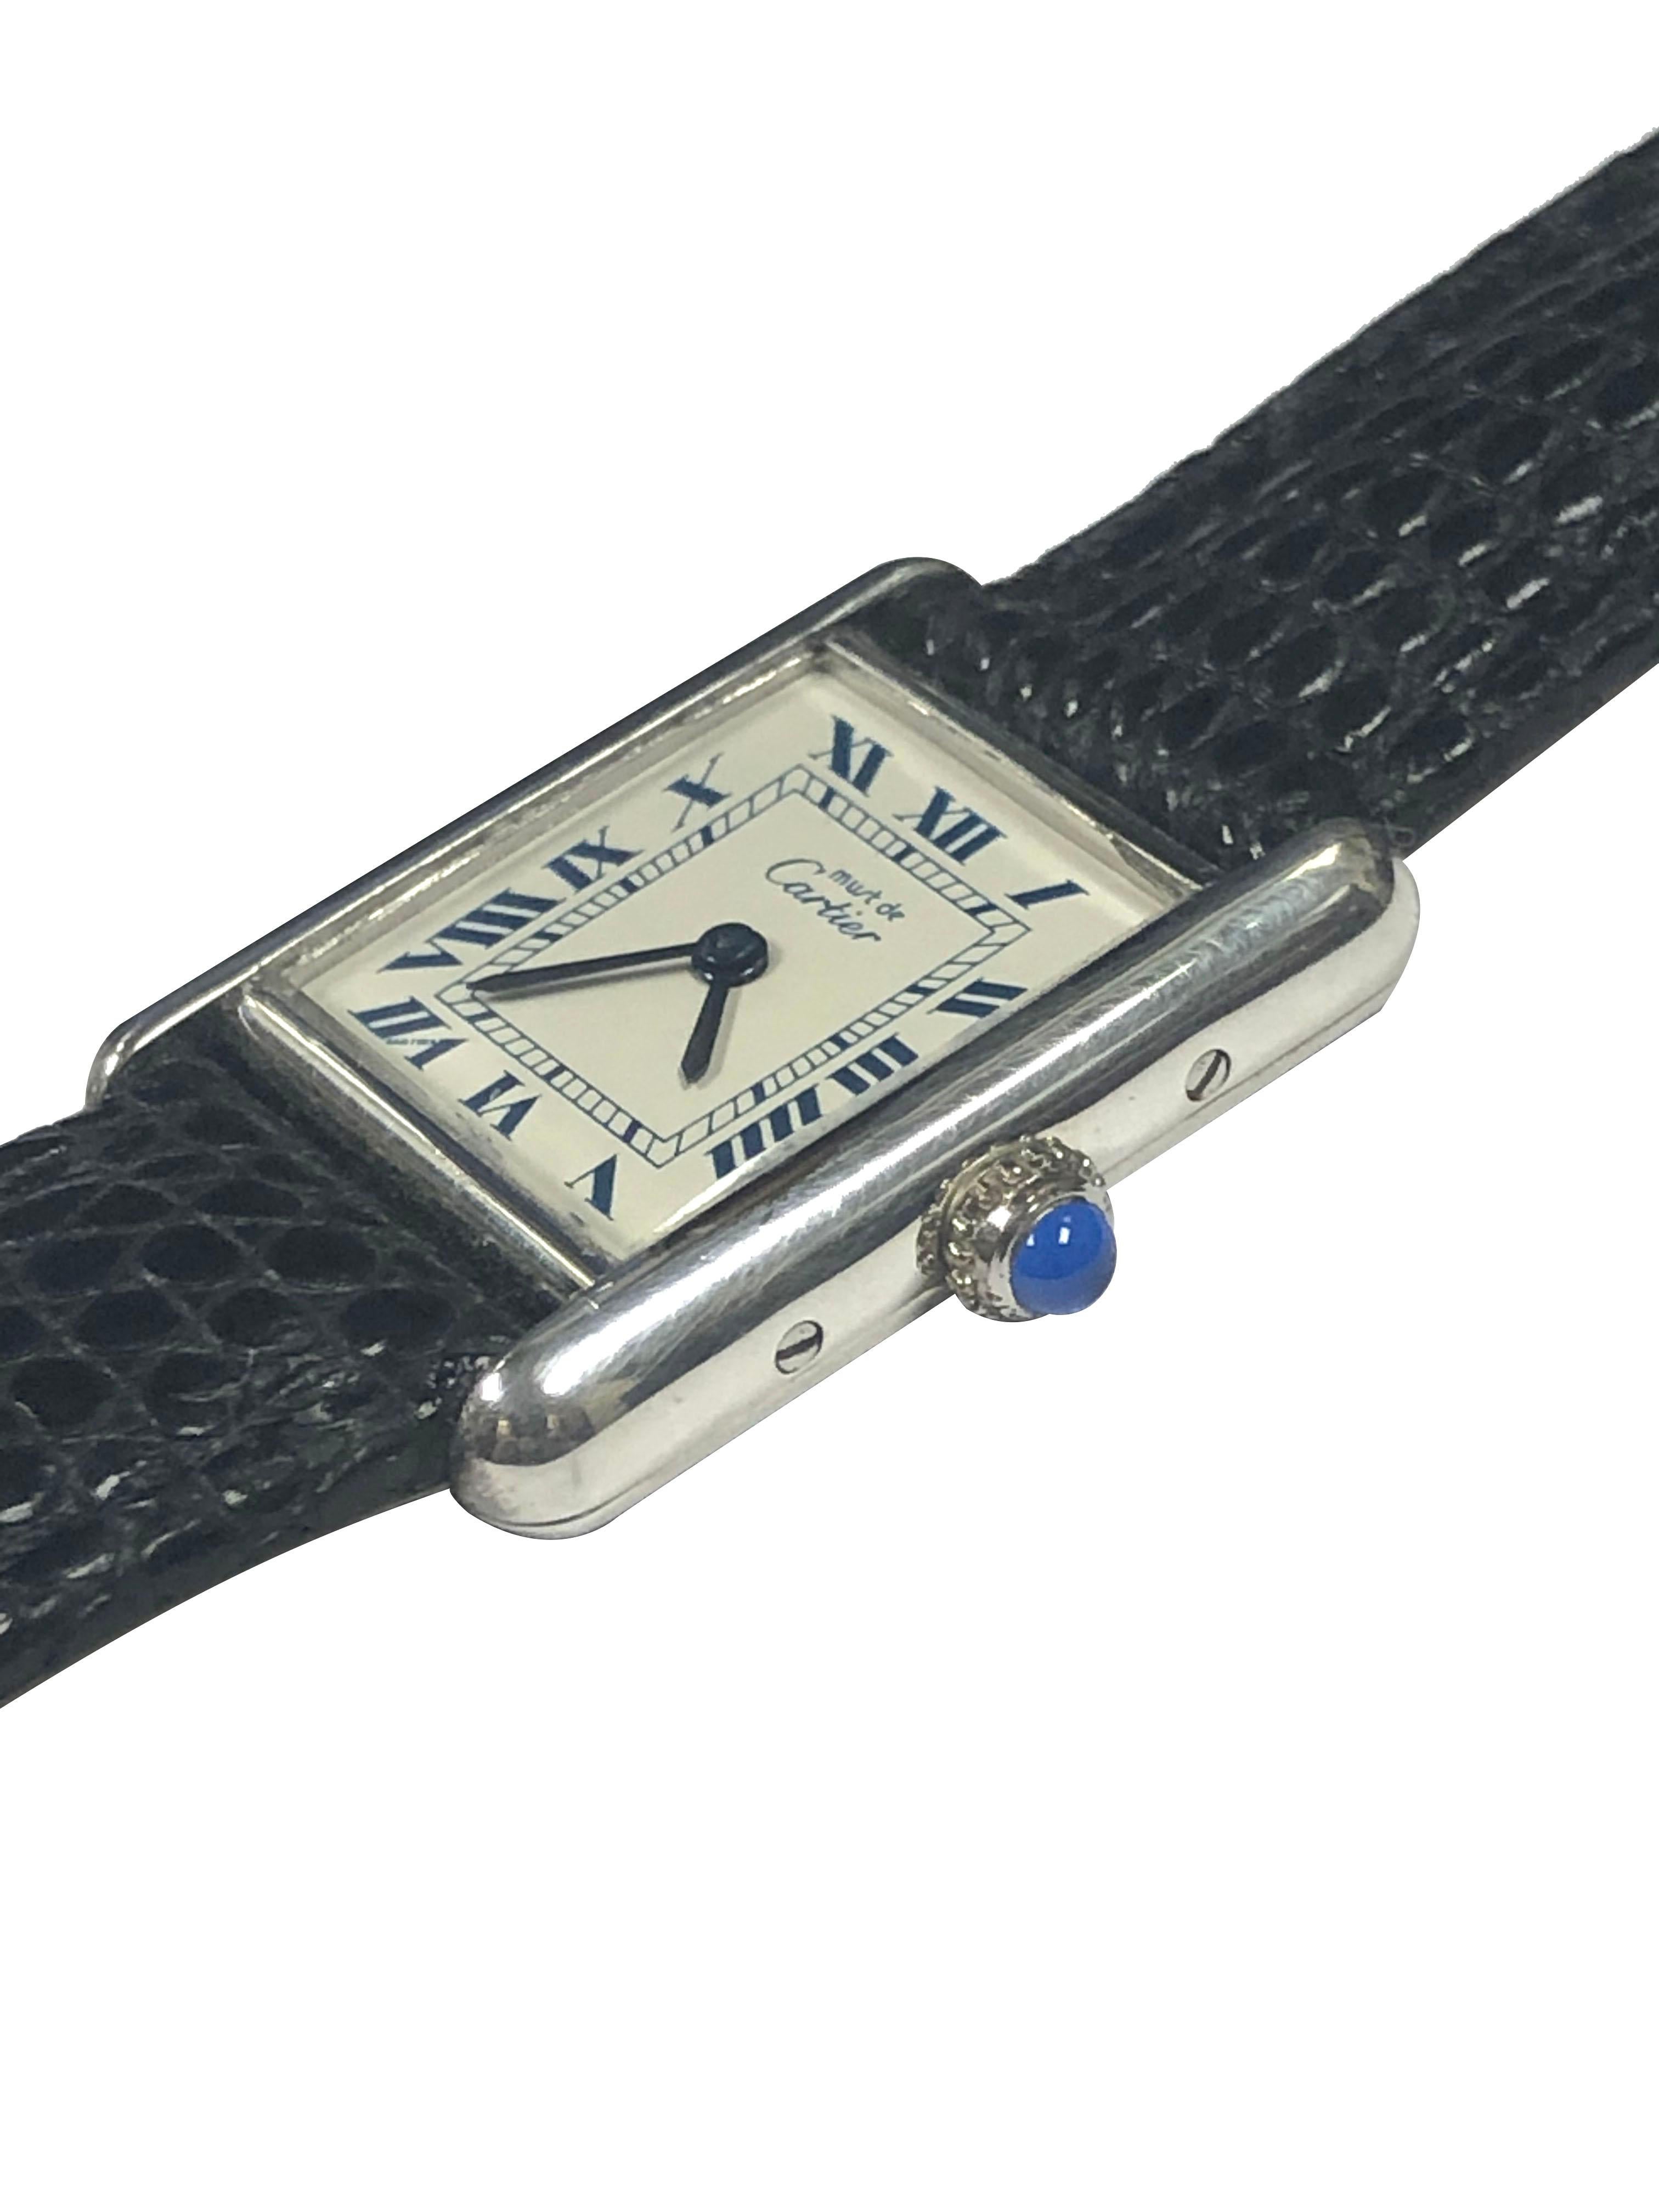 Circa 2000 Cartier classic Tank Wrist Watch, 19 X 20 M.M .925 Sterling Silver 2 piece case, Quartz movement, White dial with Blue Roman numerals, Sapphire Crown. New Black Lizard grain Leather Strap with Cartier Silver Plate Tang buckle. Comes in a